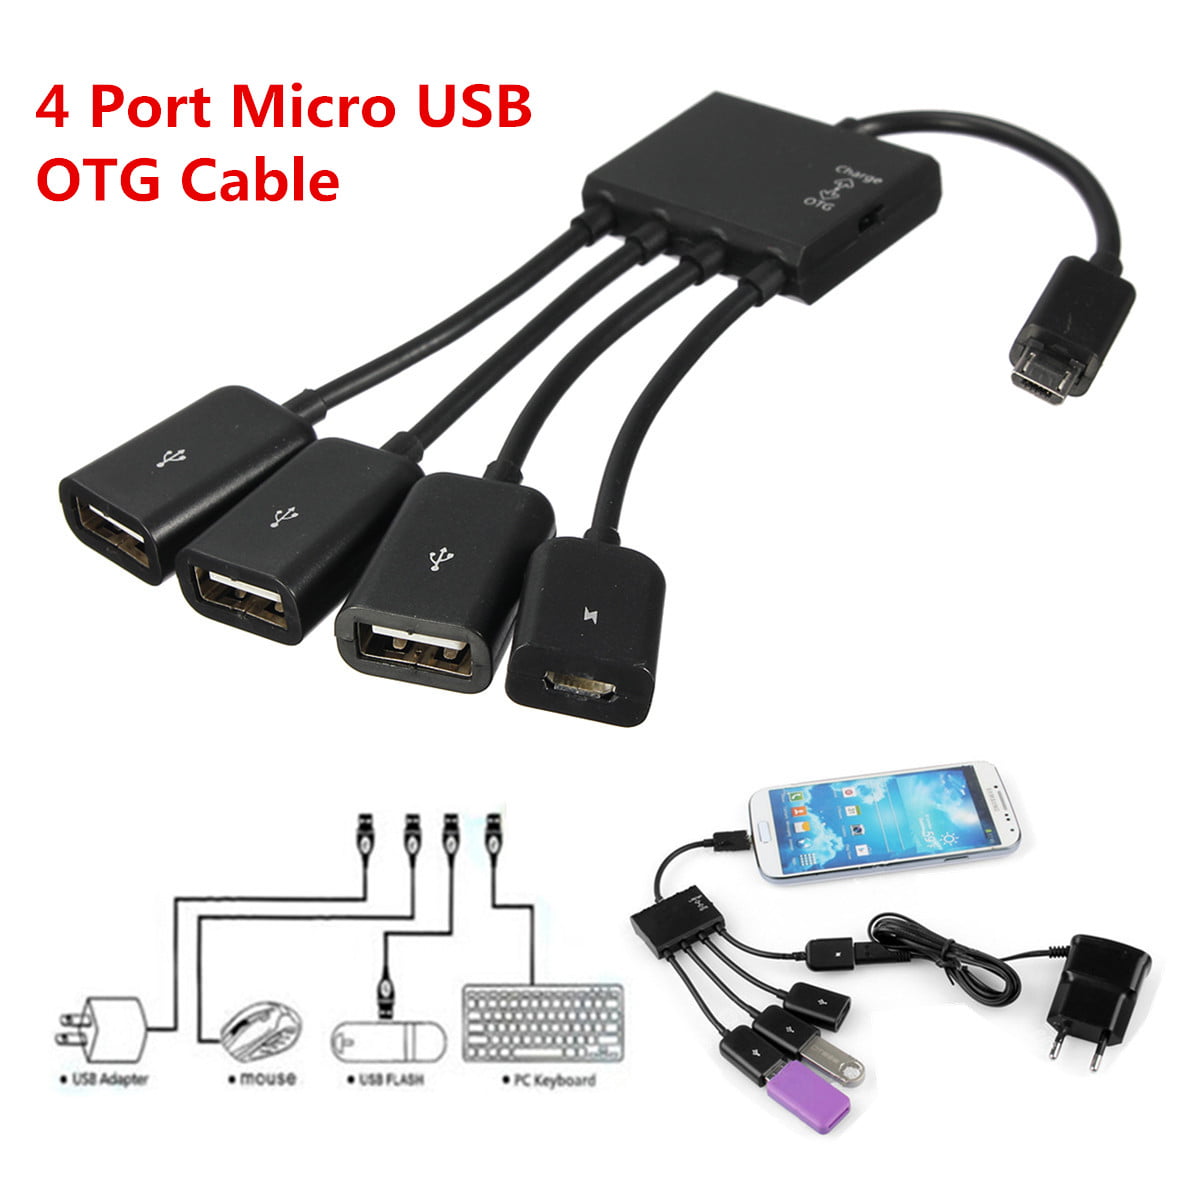 PRO OTG Cable Works for Lenovo IdeaTab A1000 Right Angle Cable Connects You to Any Compatible USB Device with MicroUSB